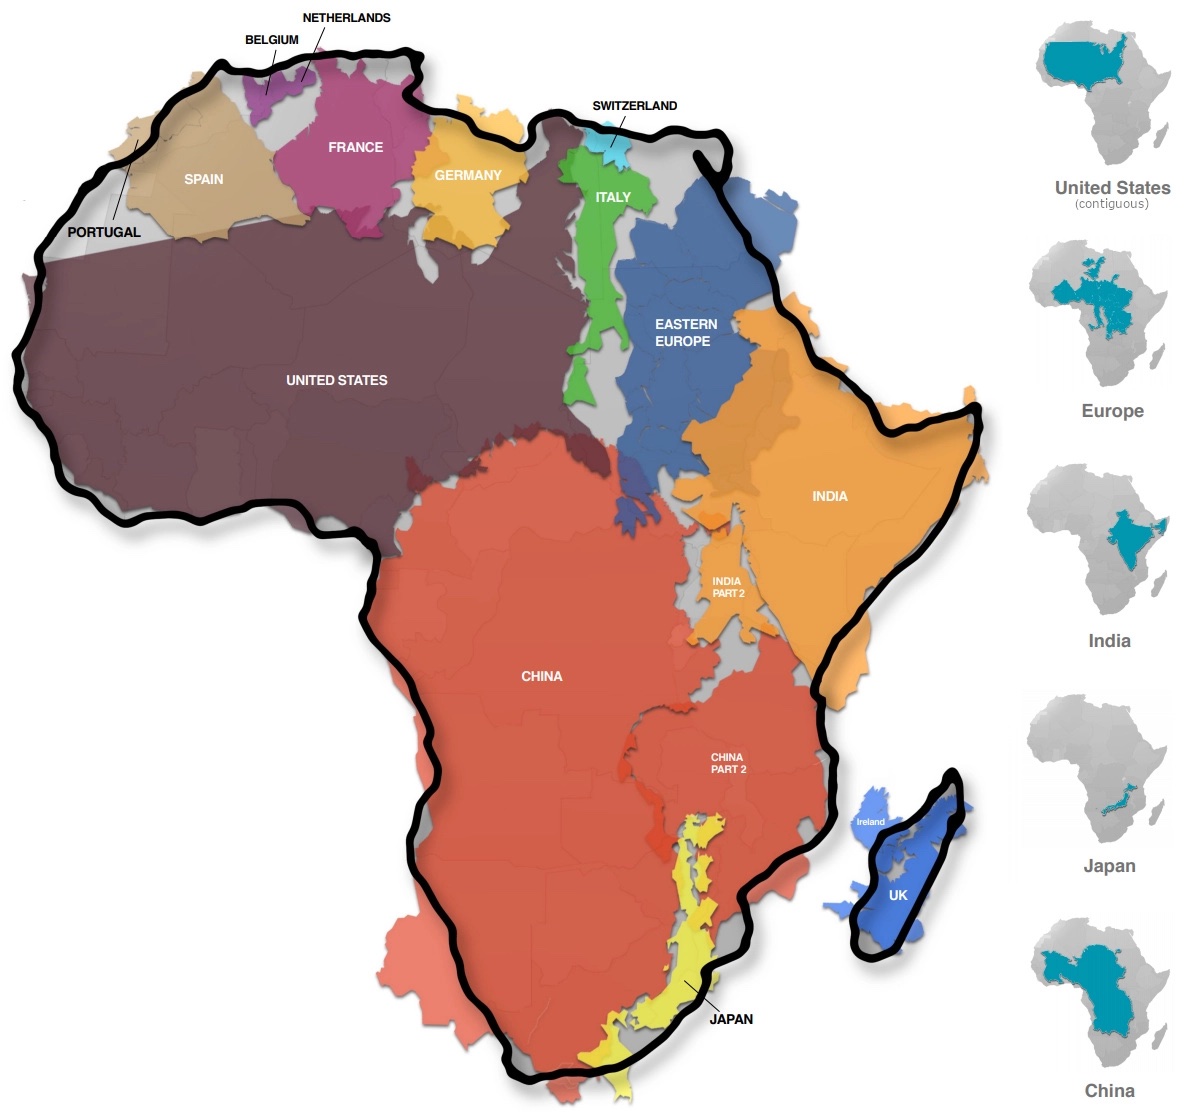 World regions arranged to fit into Africa's borders including Portugal, Spain, Belgium, Netherlands, France, Germany, United States, Switzerland, Italy, Eastern Europe, China, India, Japan, and the UK.